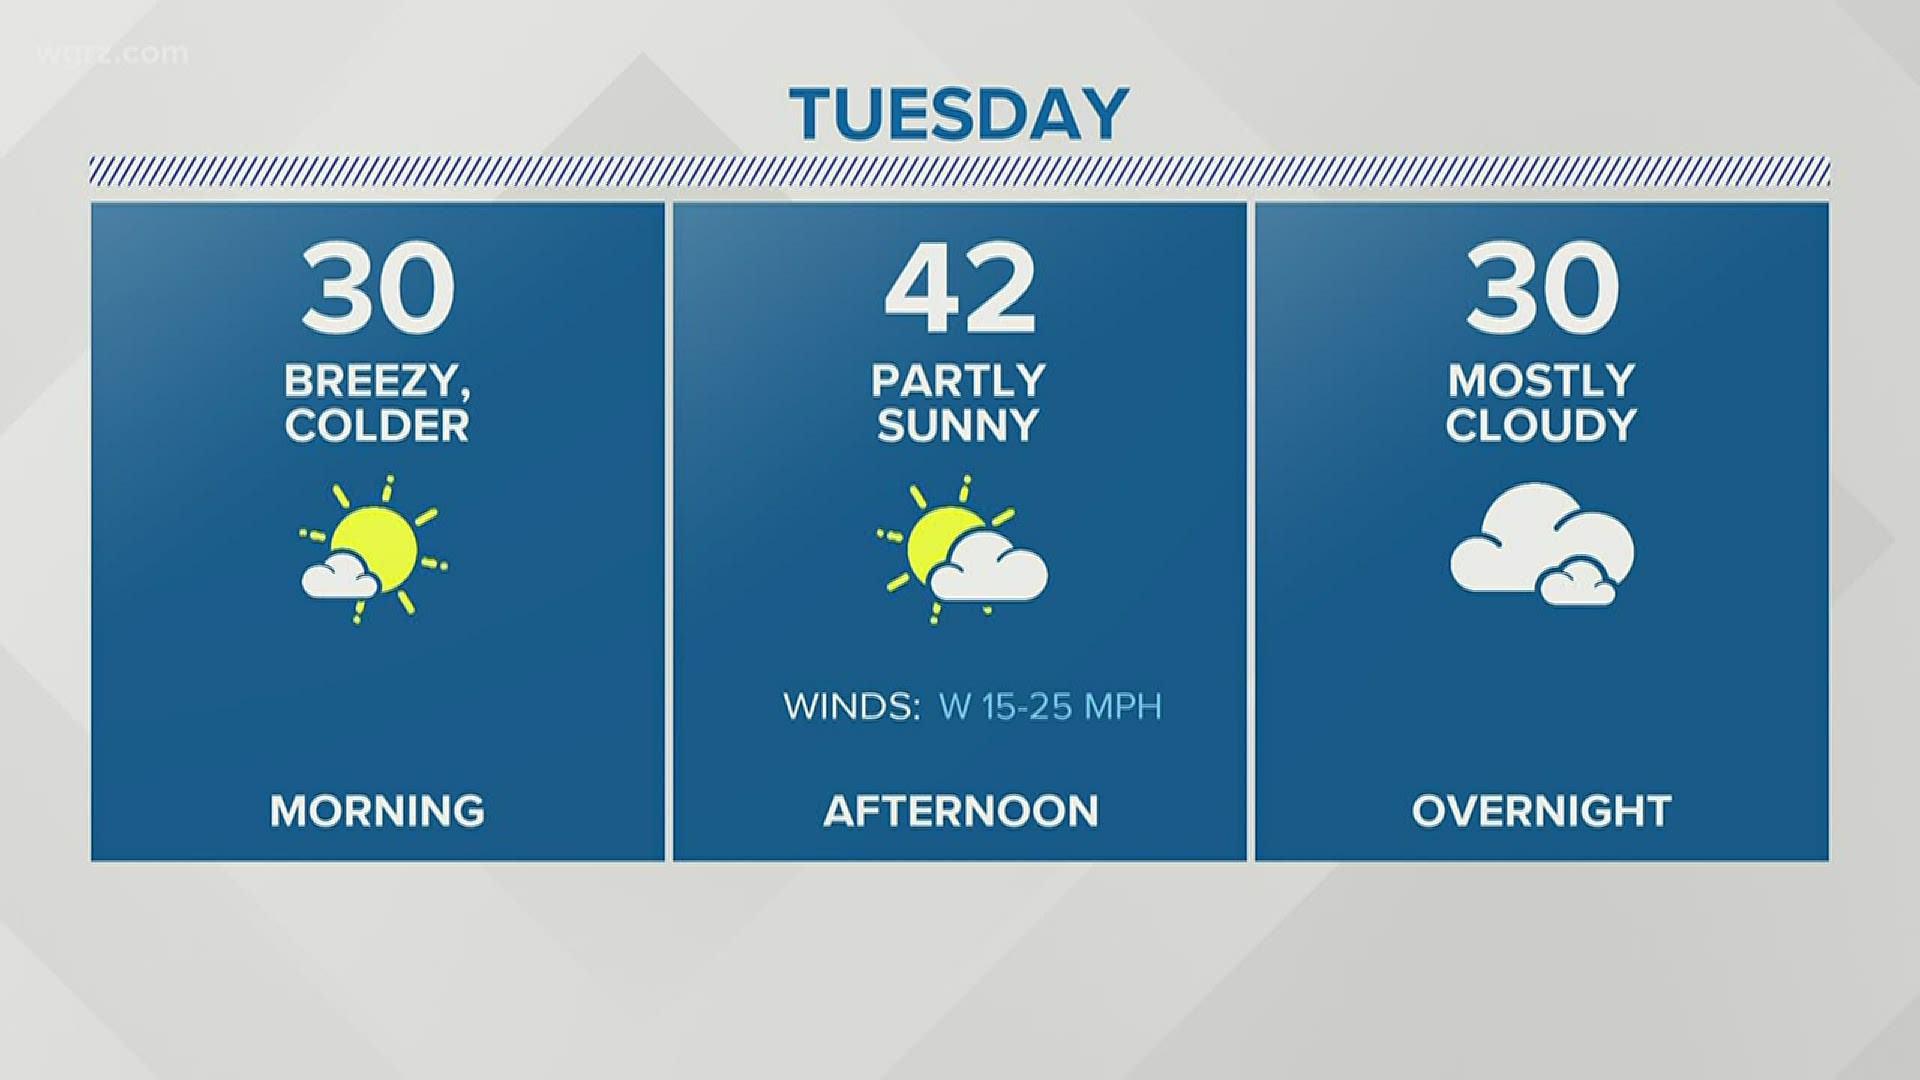 Mainly dry day tomorrow but there will be a cold breeze. Wind chills will be in the 20,s. A few scattered showers are likely on Wednesday as well.